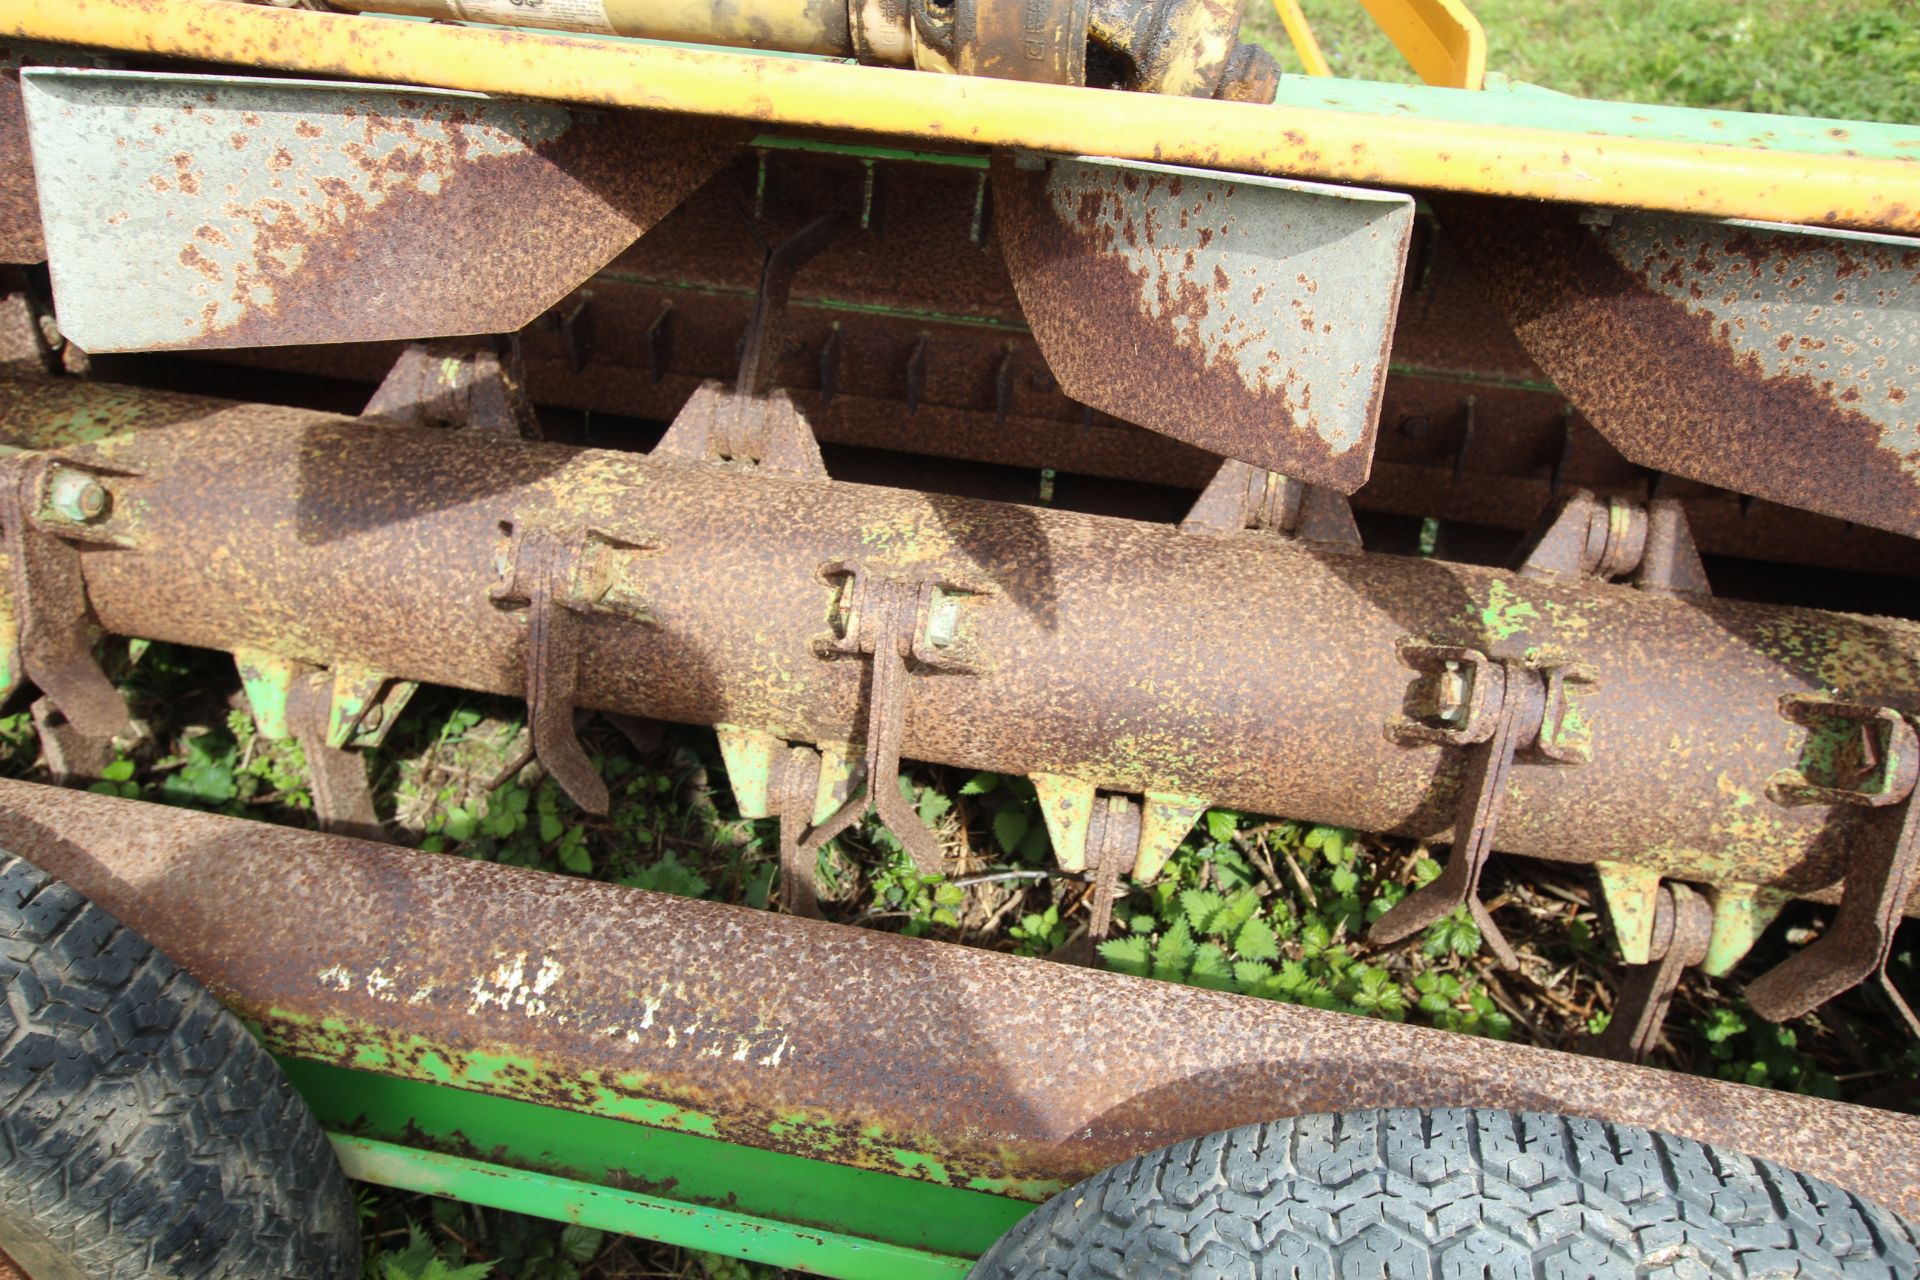 Rekord PTO driven straw chopper. Owned from new. - Image 10 of 15